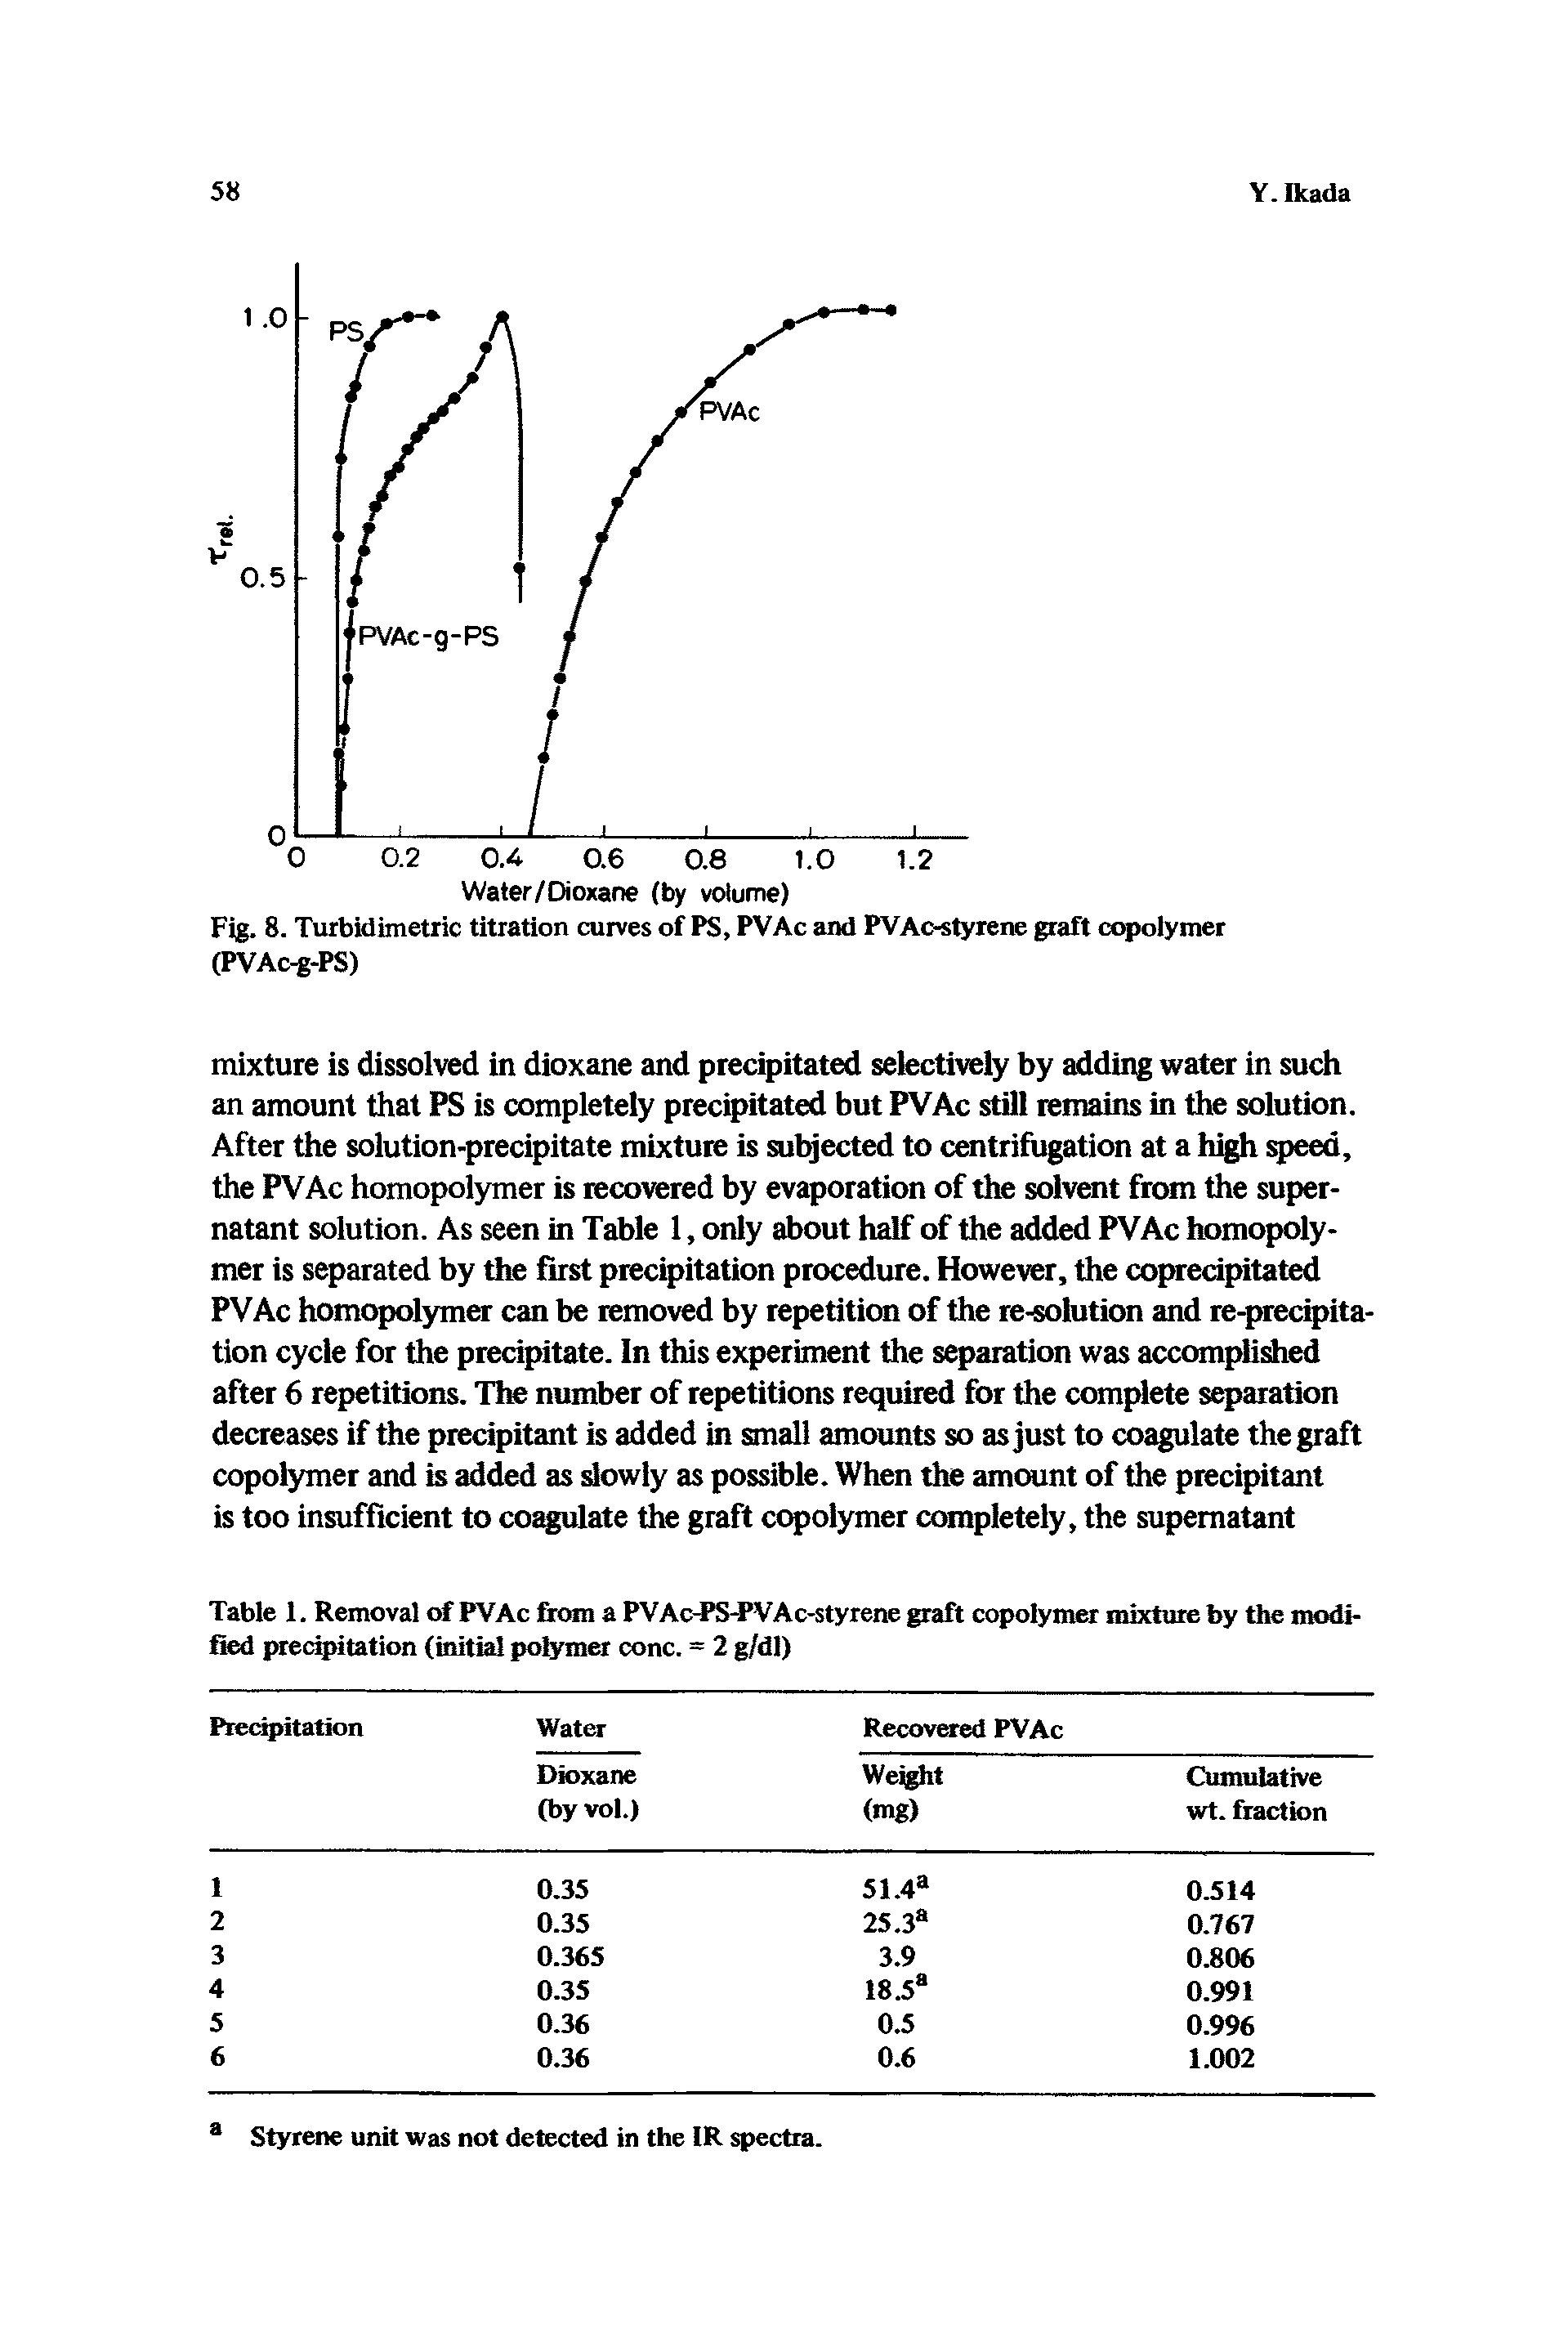 Table 1. Removal of PVAc from a PVAc-PS-PVAc-styrene graft copolymer mixture by the modified precipitation (initial polymer cone. = 2 g/dl)...